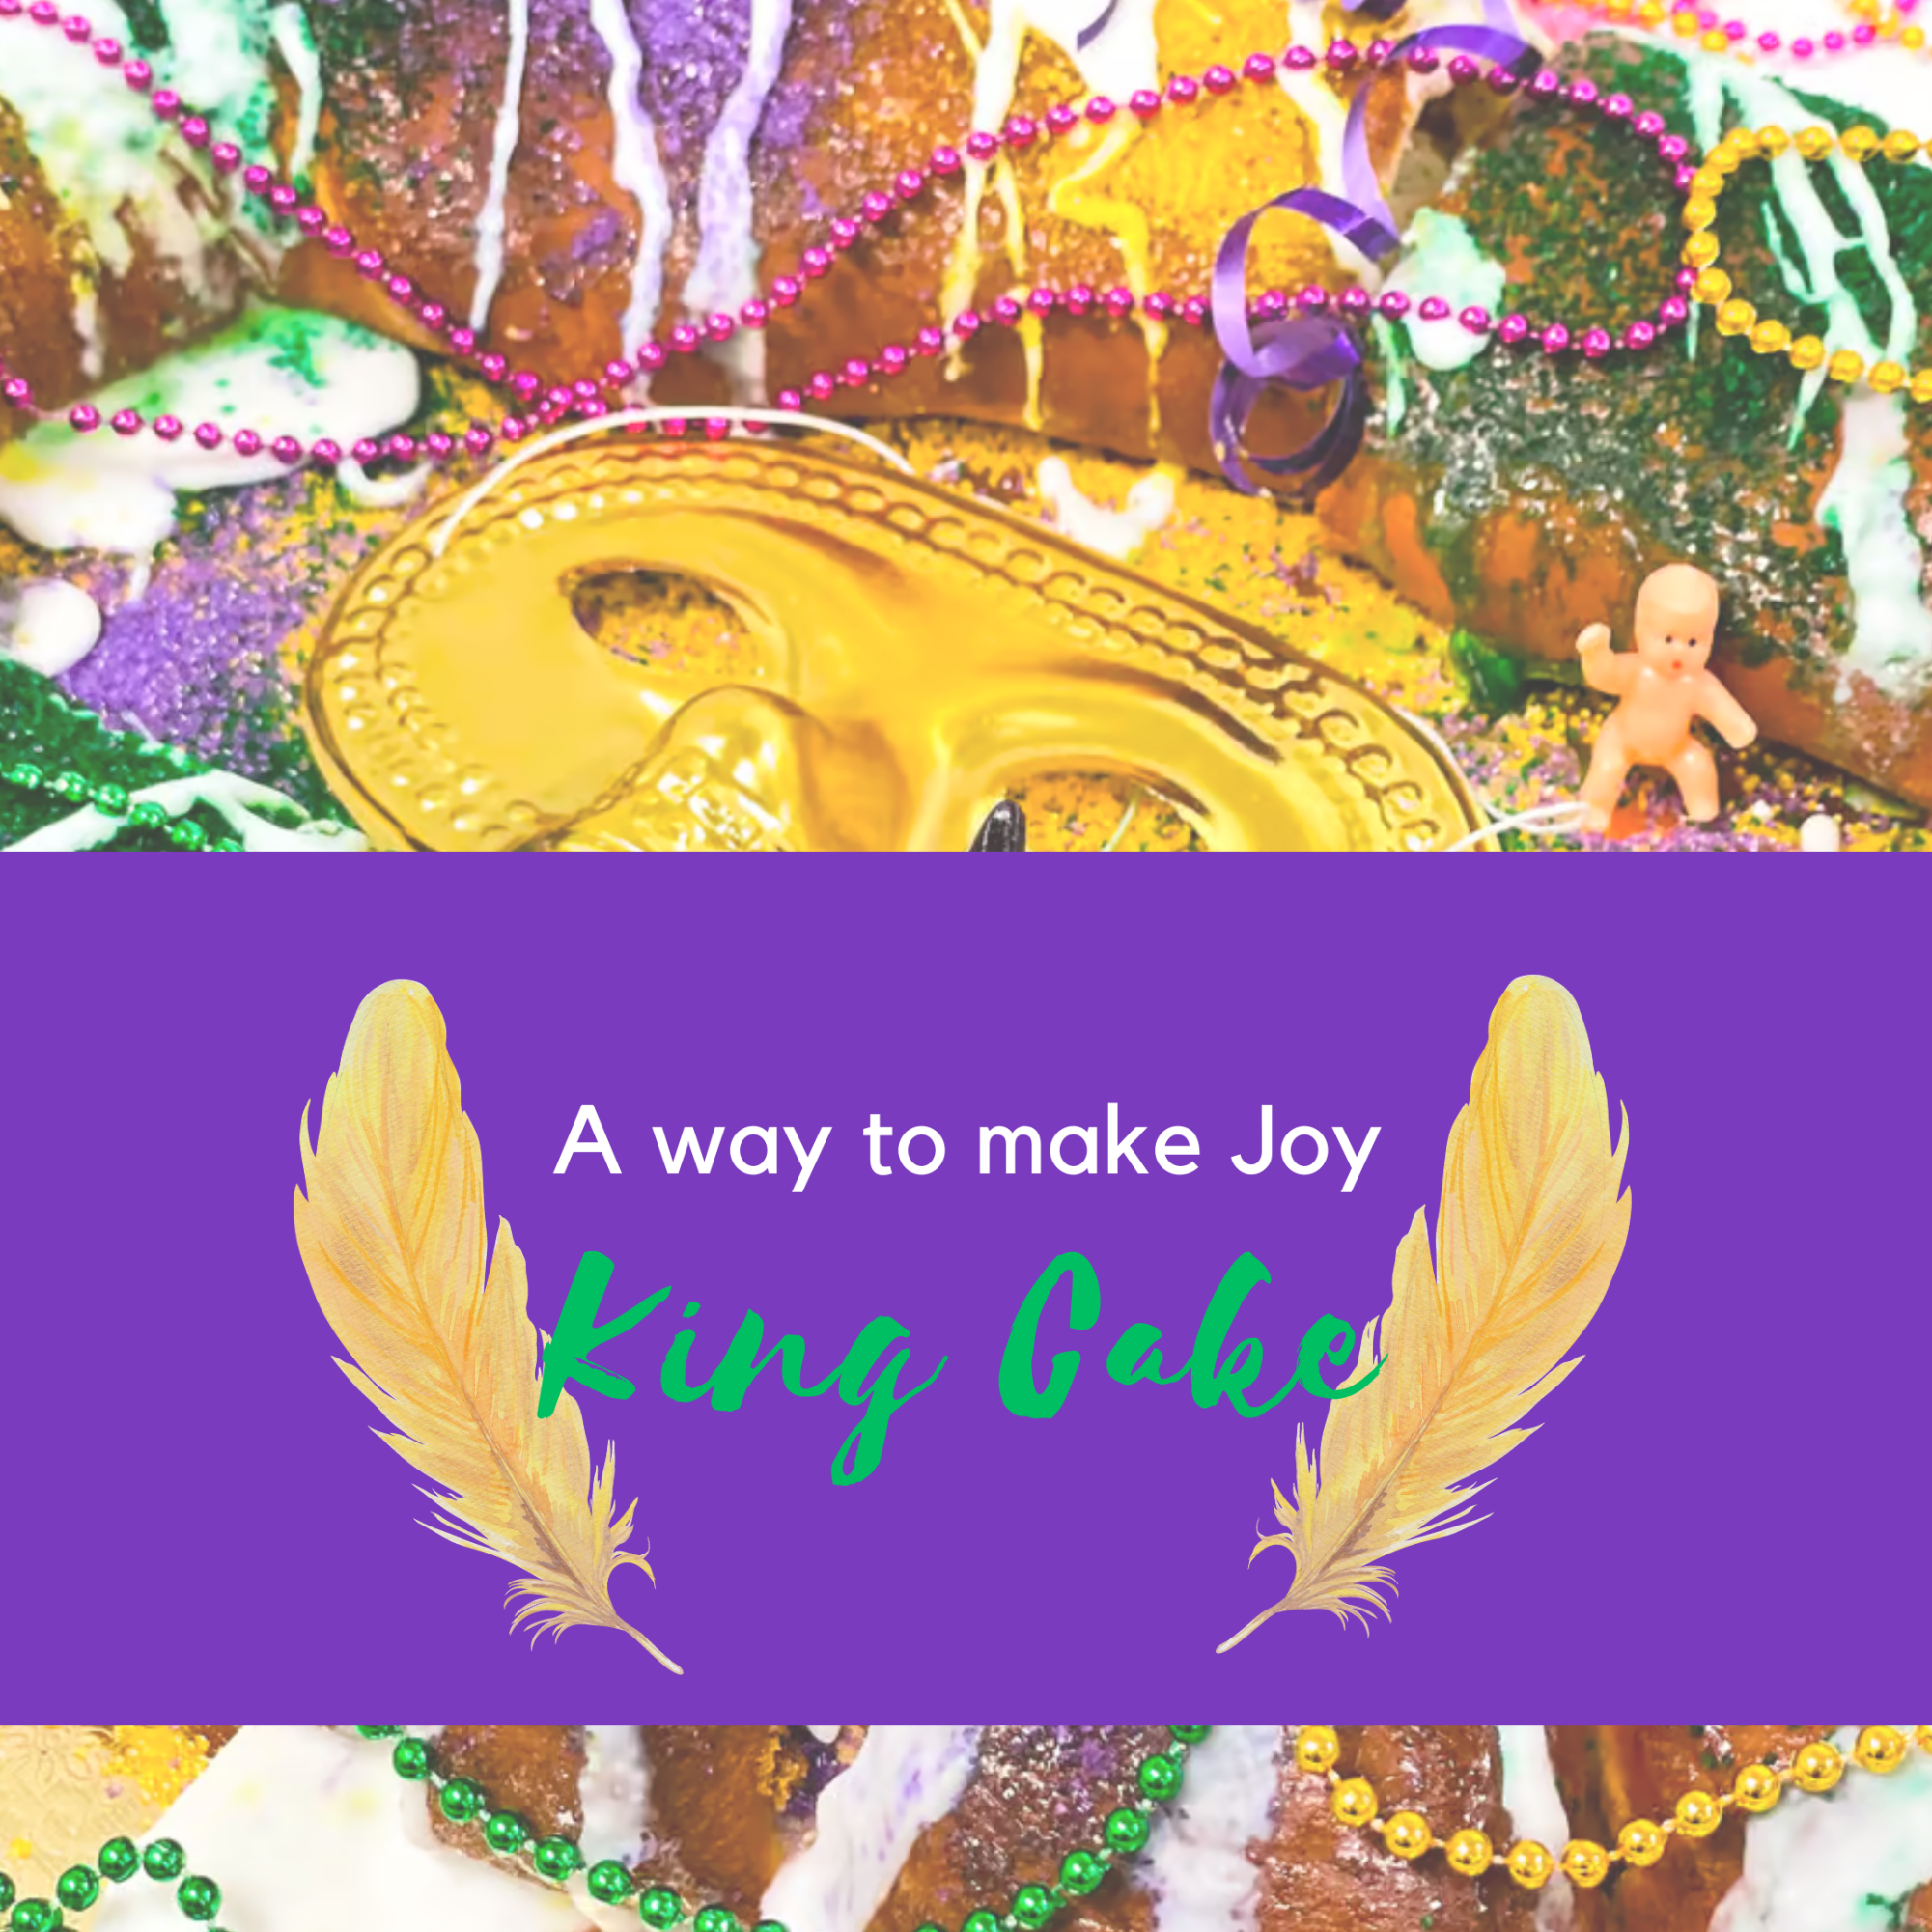 The best way to enjoy Mardi Gras? A king cake, of course